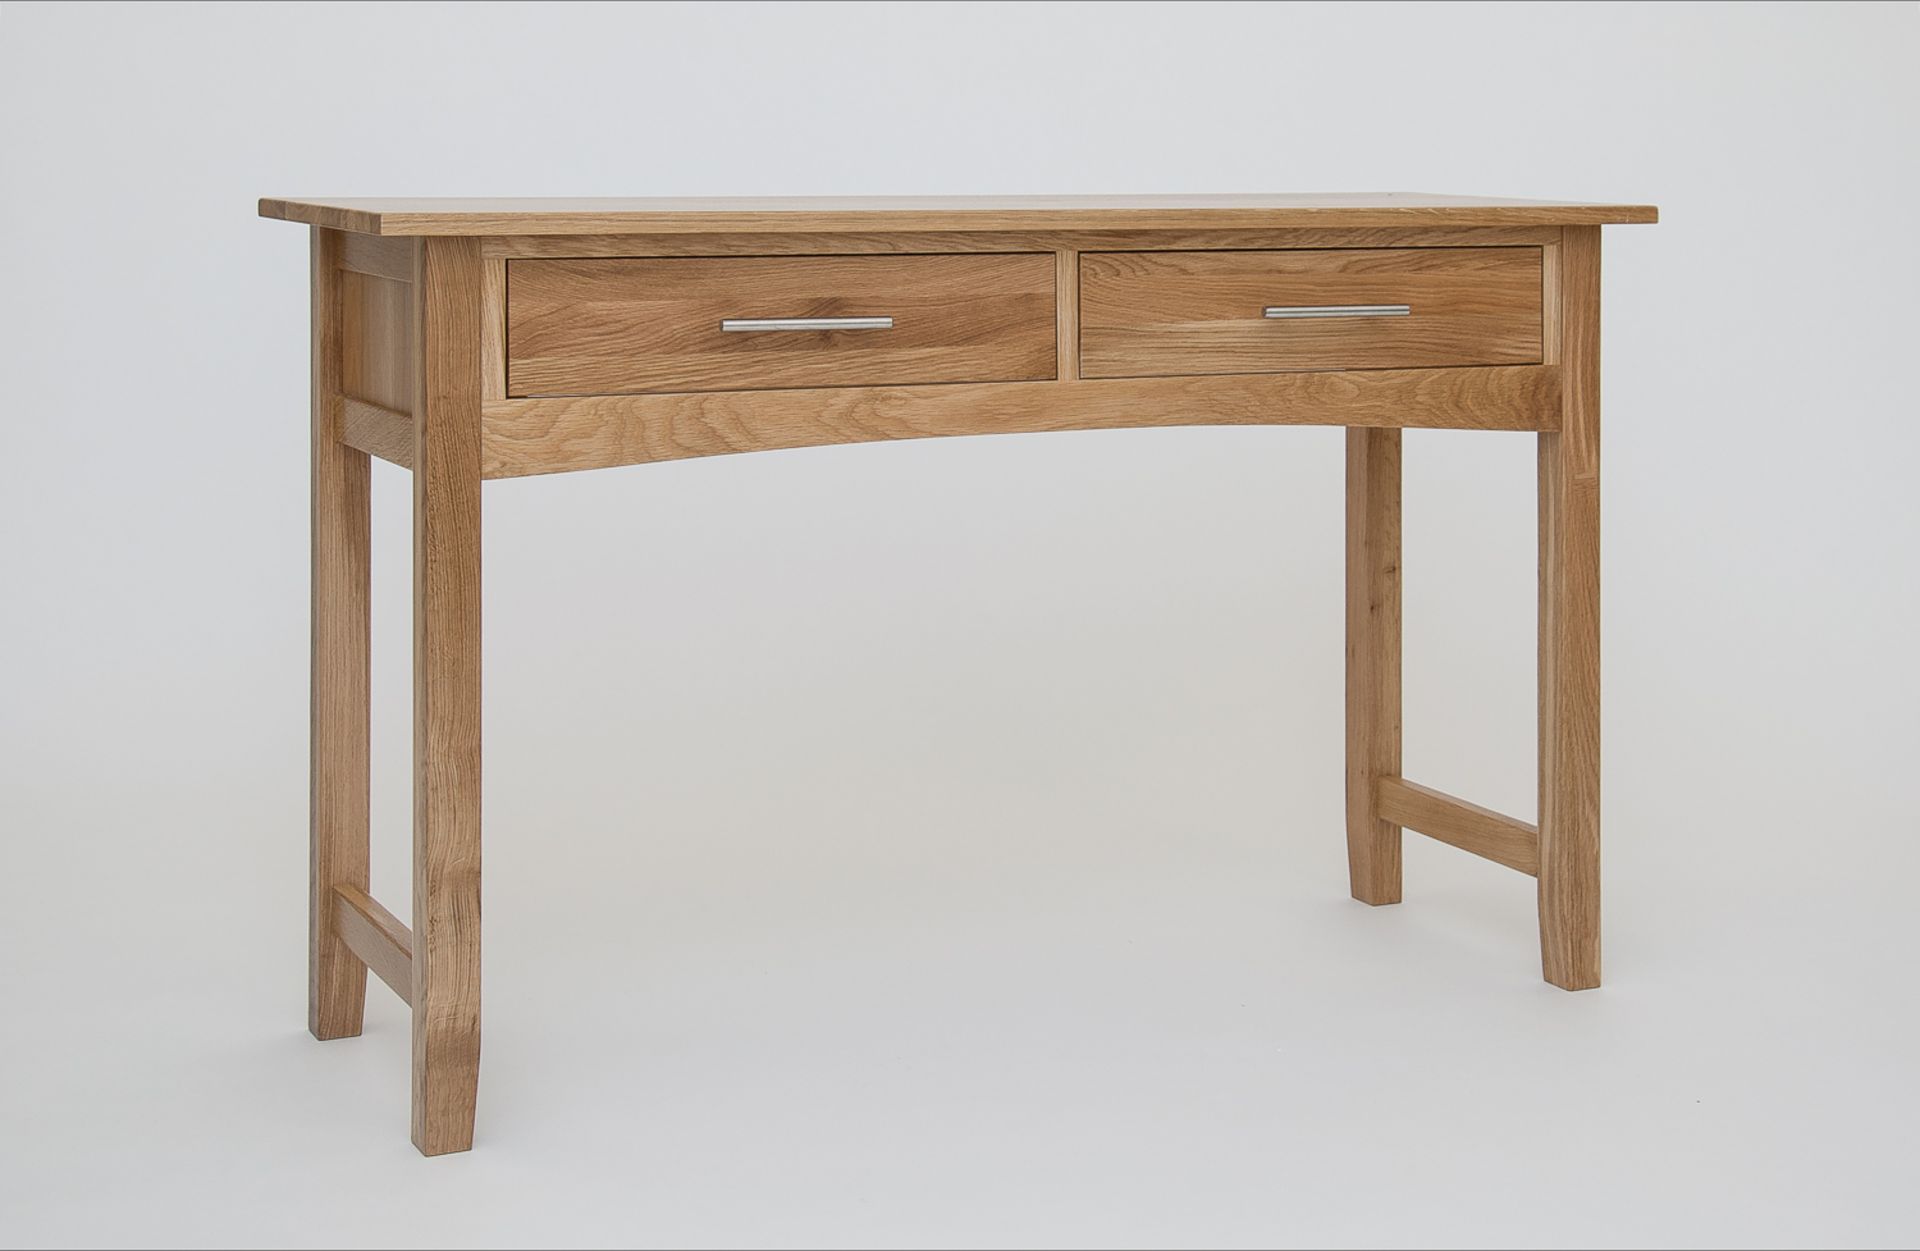 1x Hereford Oak Console Dressing Table